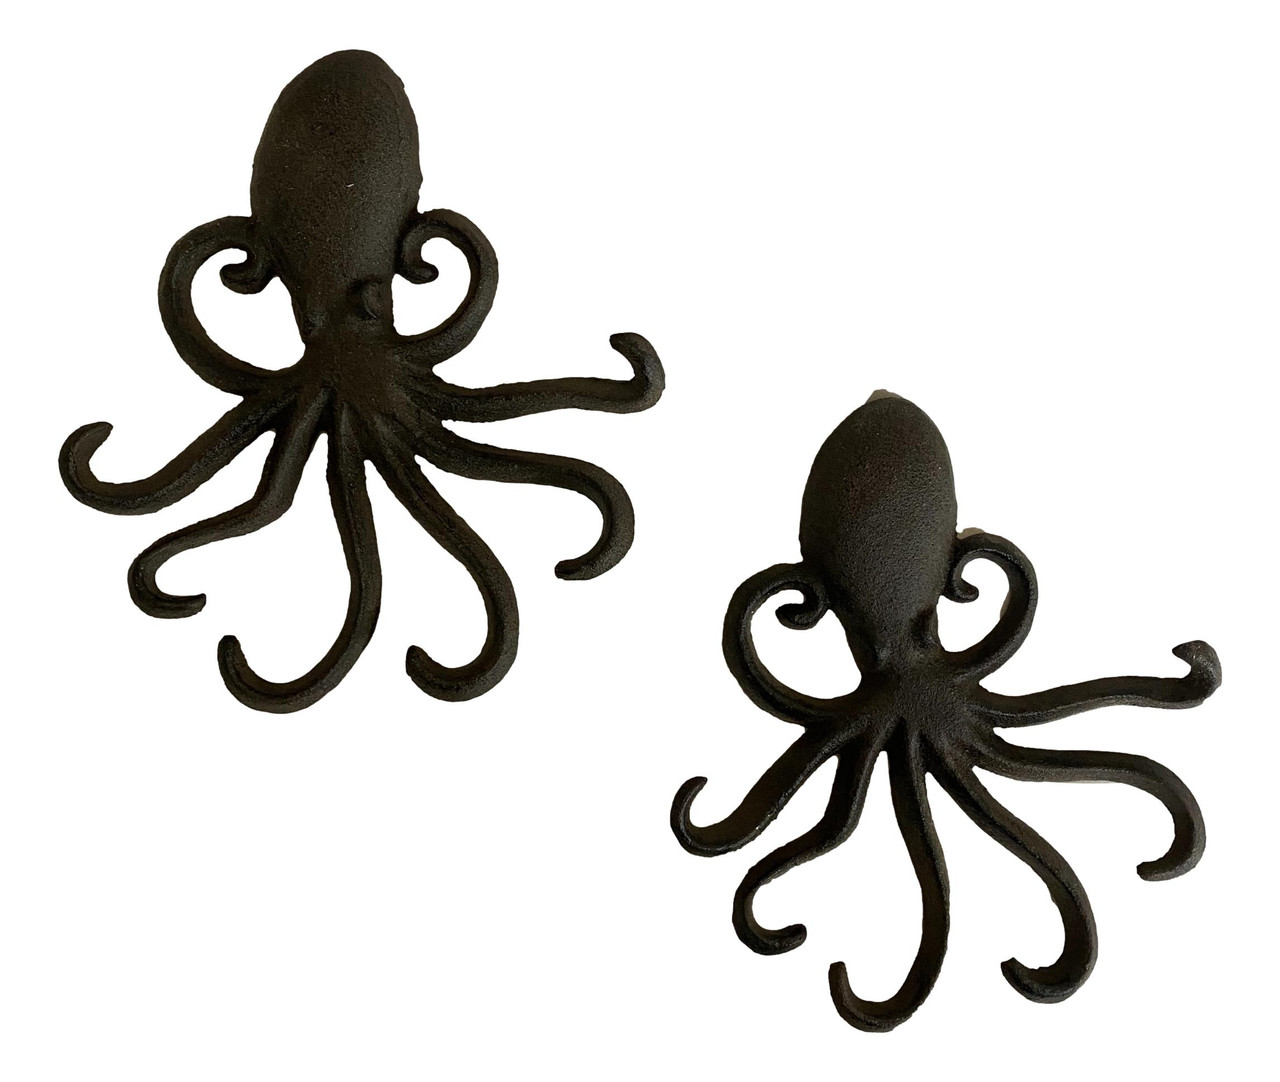 Octopus Sea Life Wall Decoration Holds Keys, Towels Set of 2